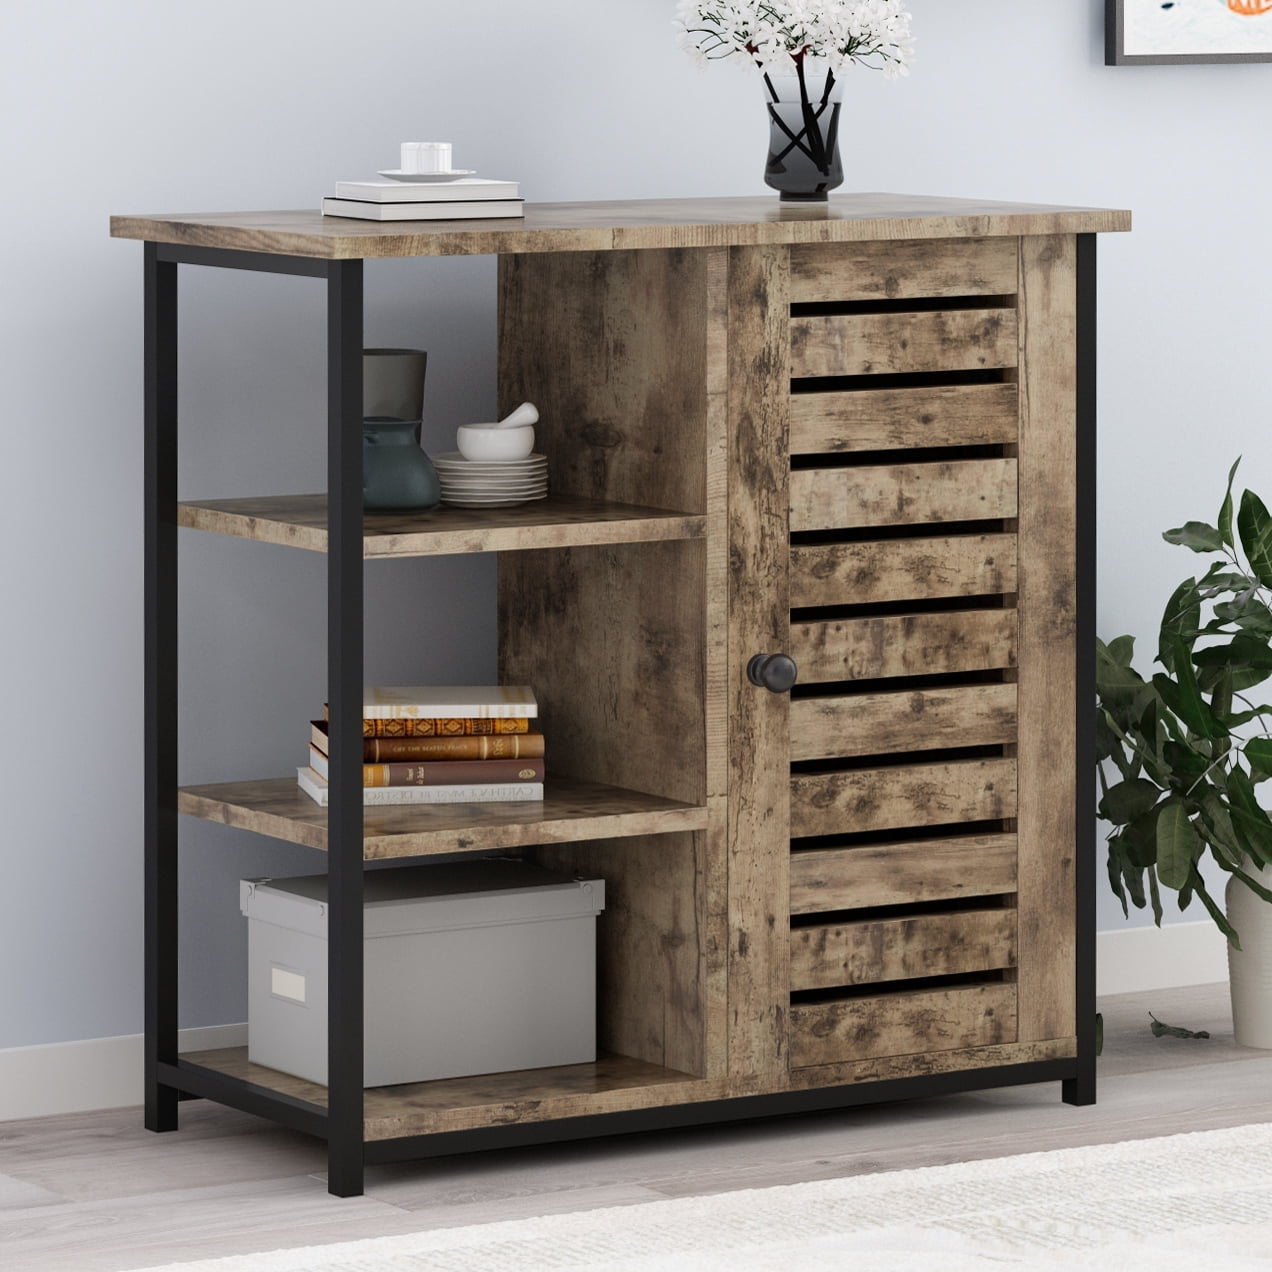 Multi Functional Floor Standing Shelf Storage Cabinets With Doors And Shelves For Living Room